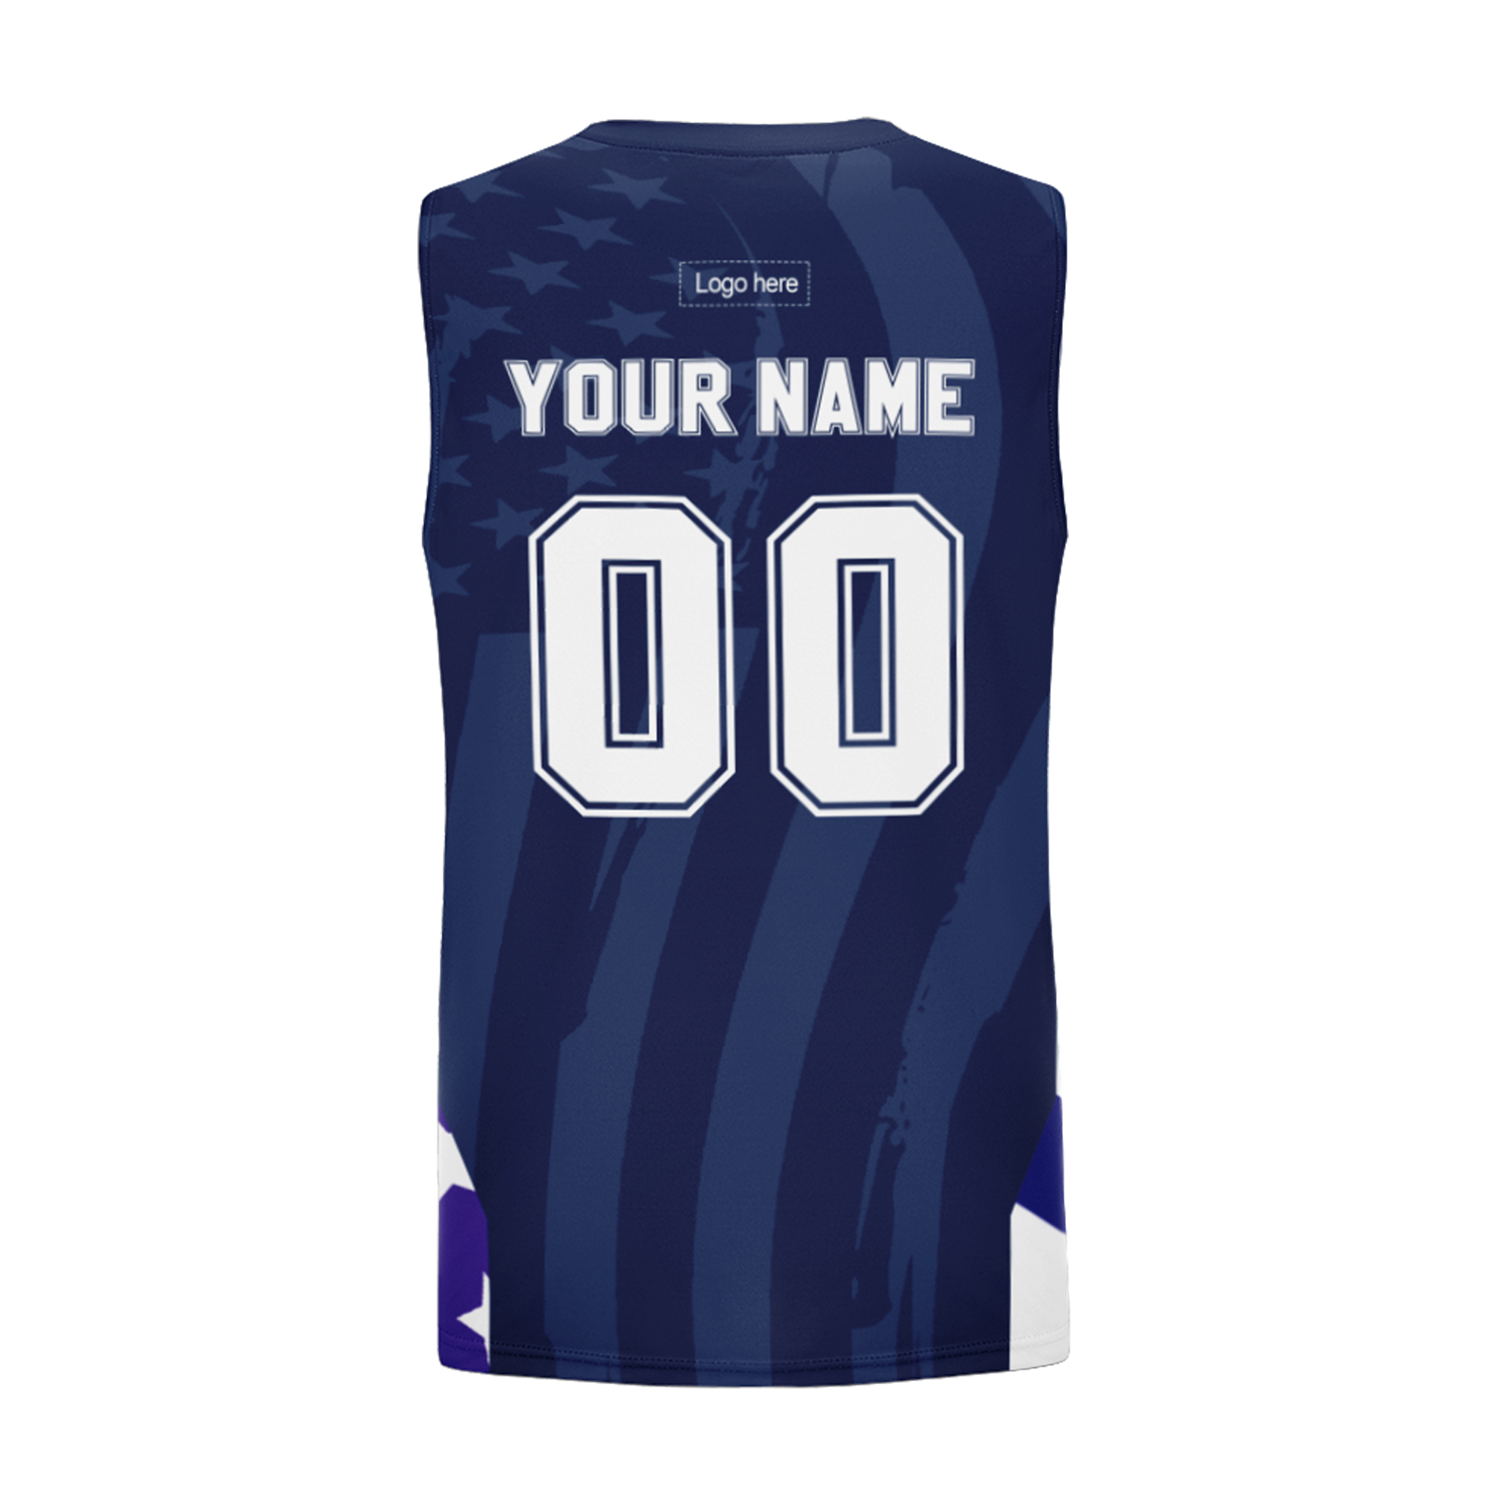 customize-basketball-sports-wear-team-training-jerseys-print-on-demand-breathable-basketball-suits-7